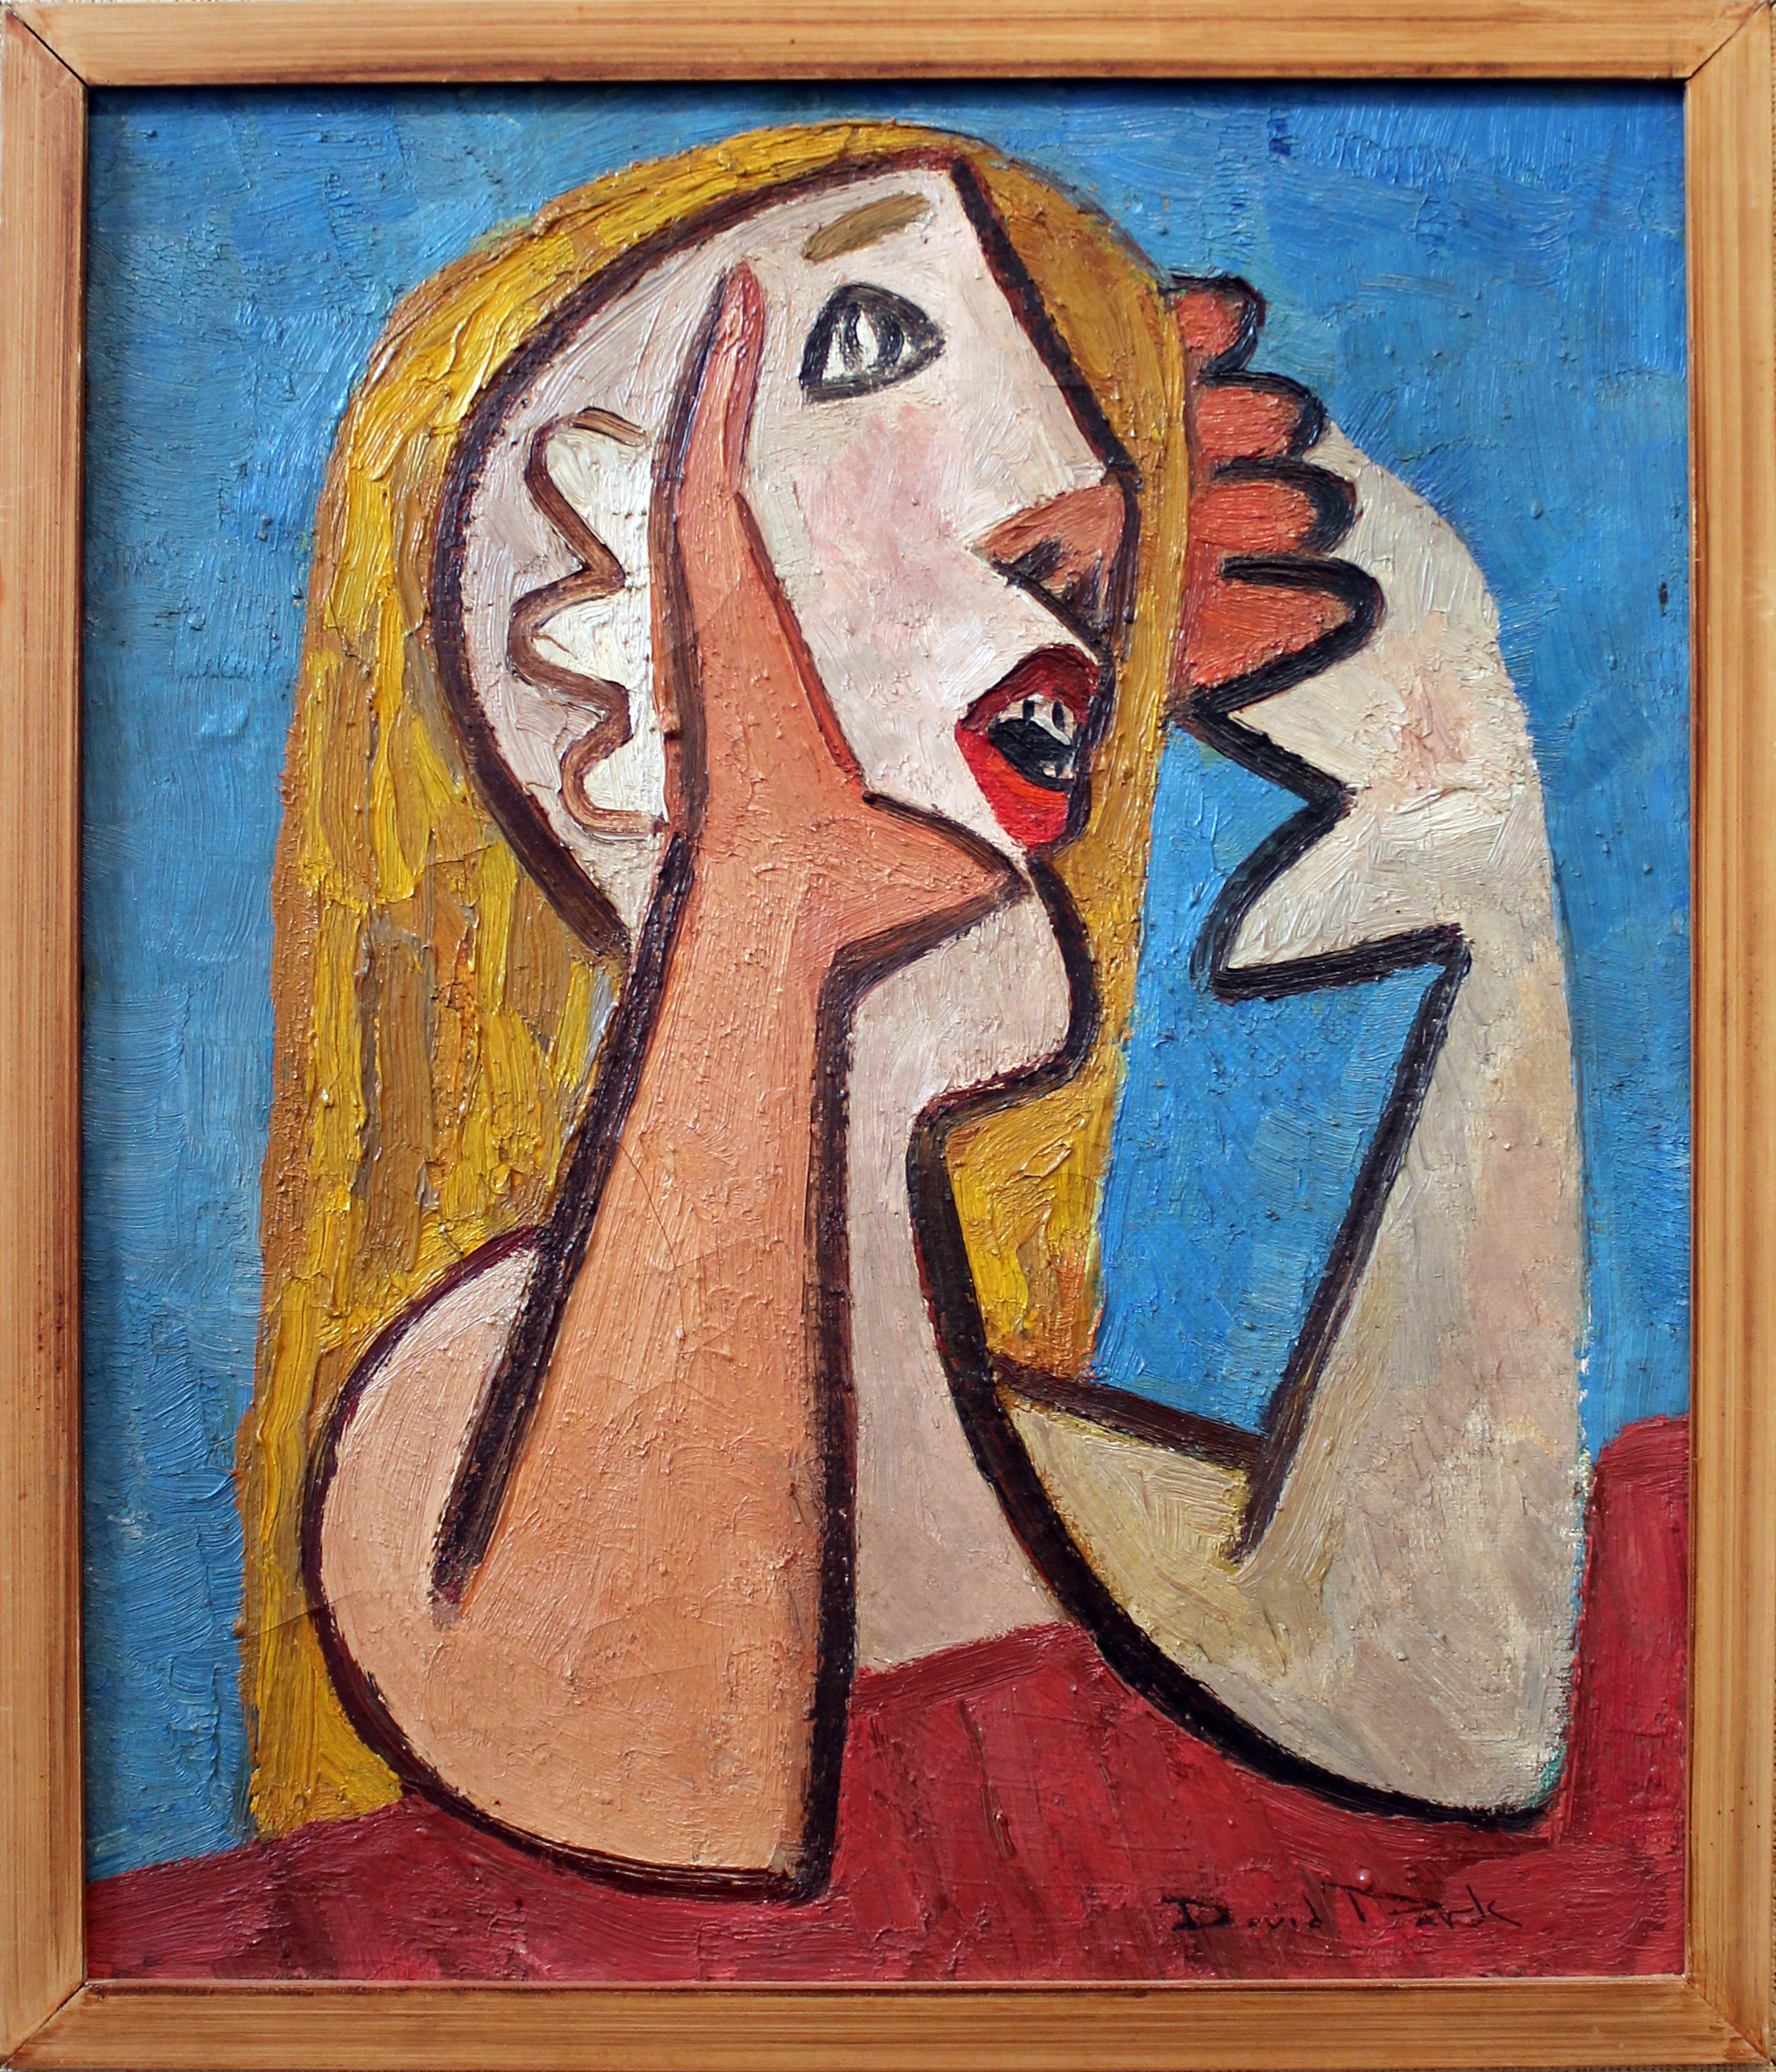 Painting of a blonde woman with elbows on a red table and blue background